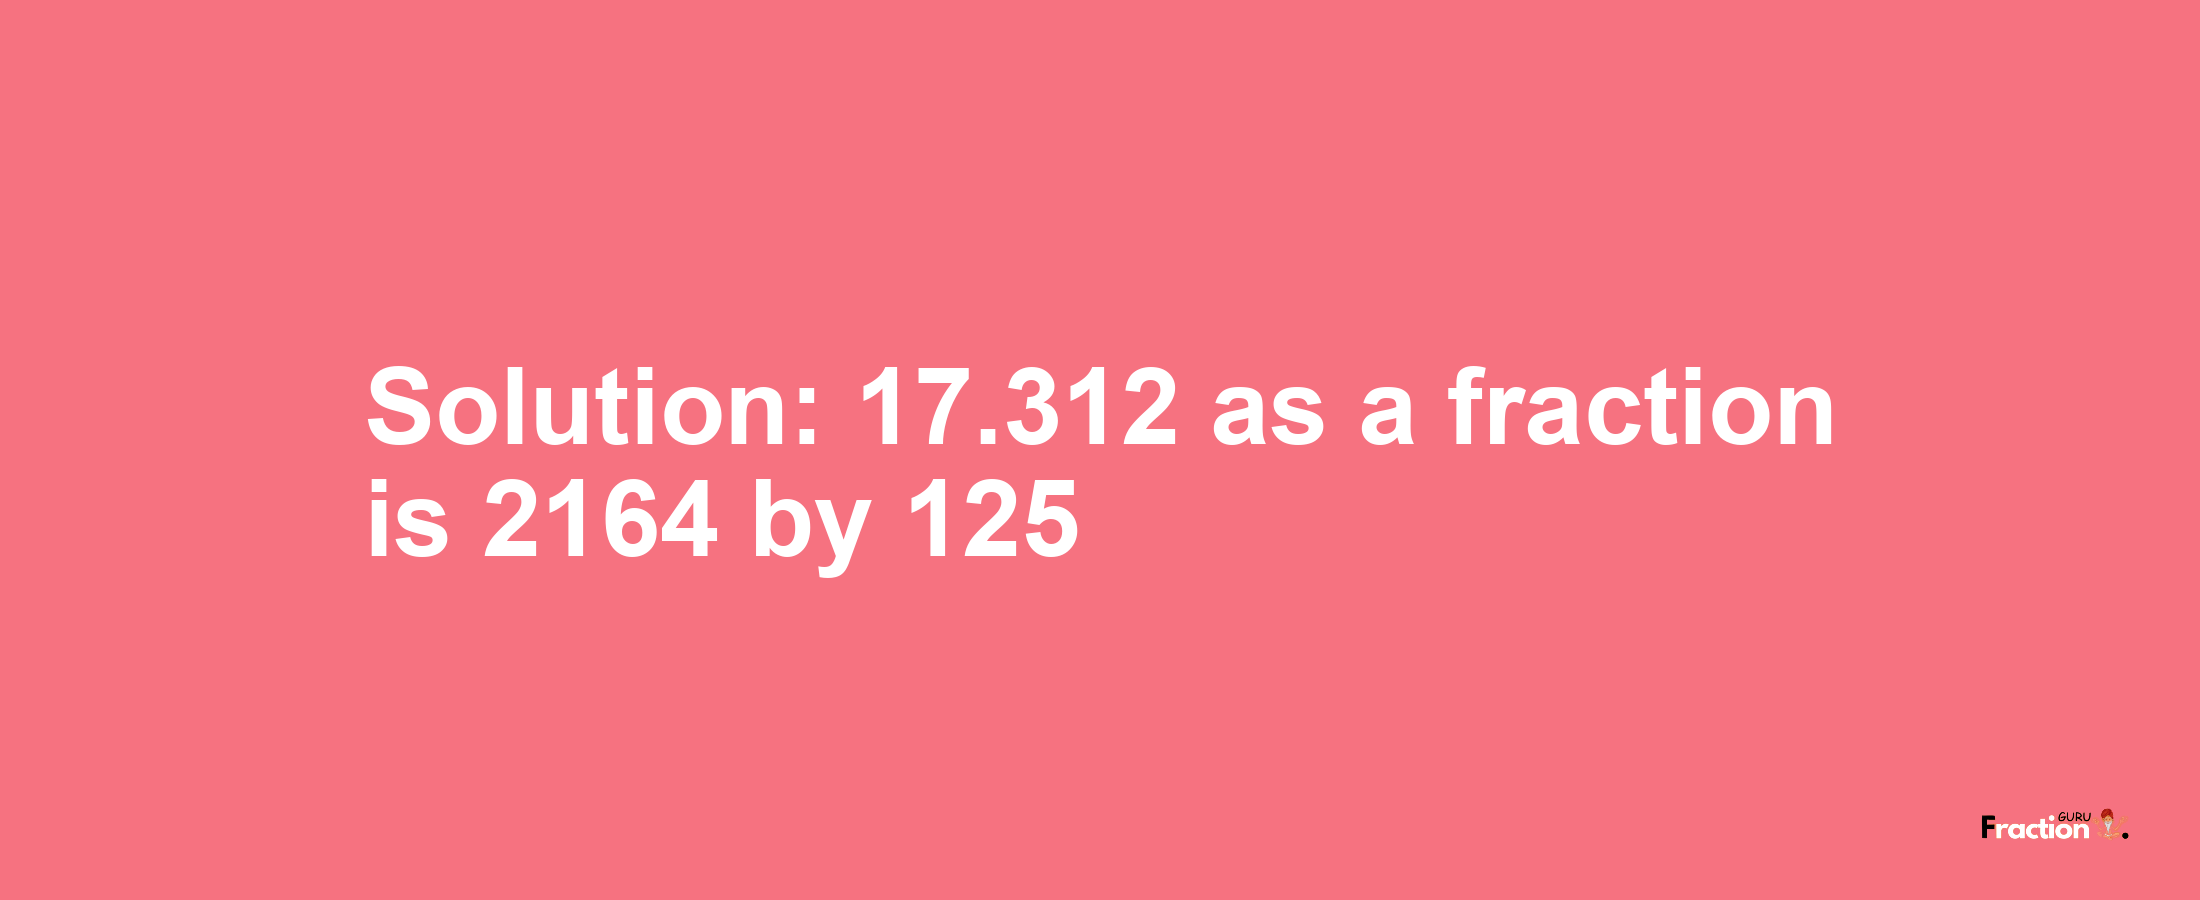 Solution:17.312 as a fraction is 2164/125